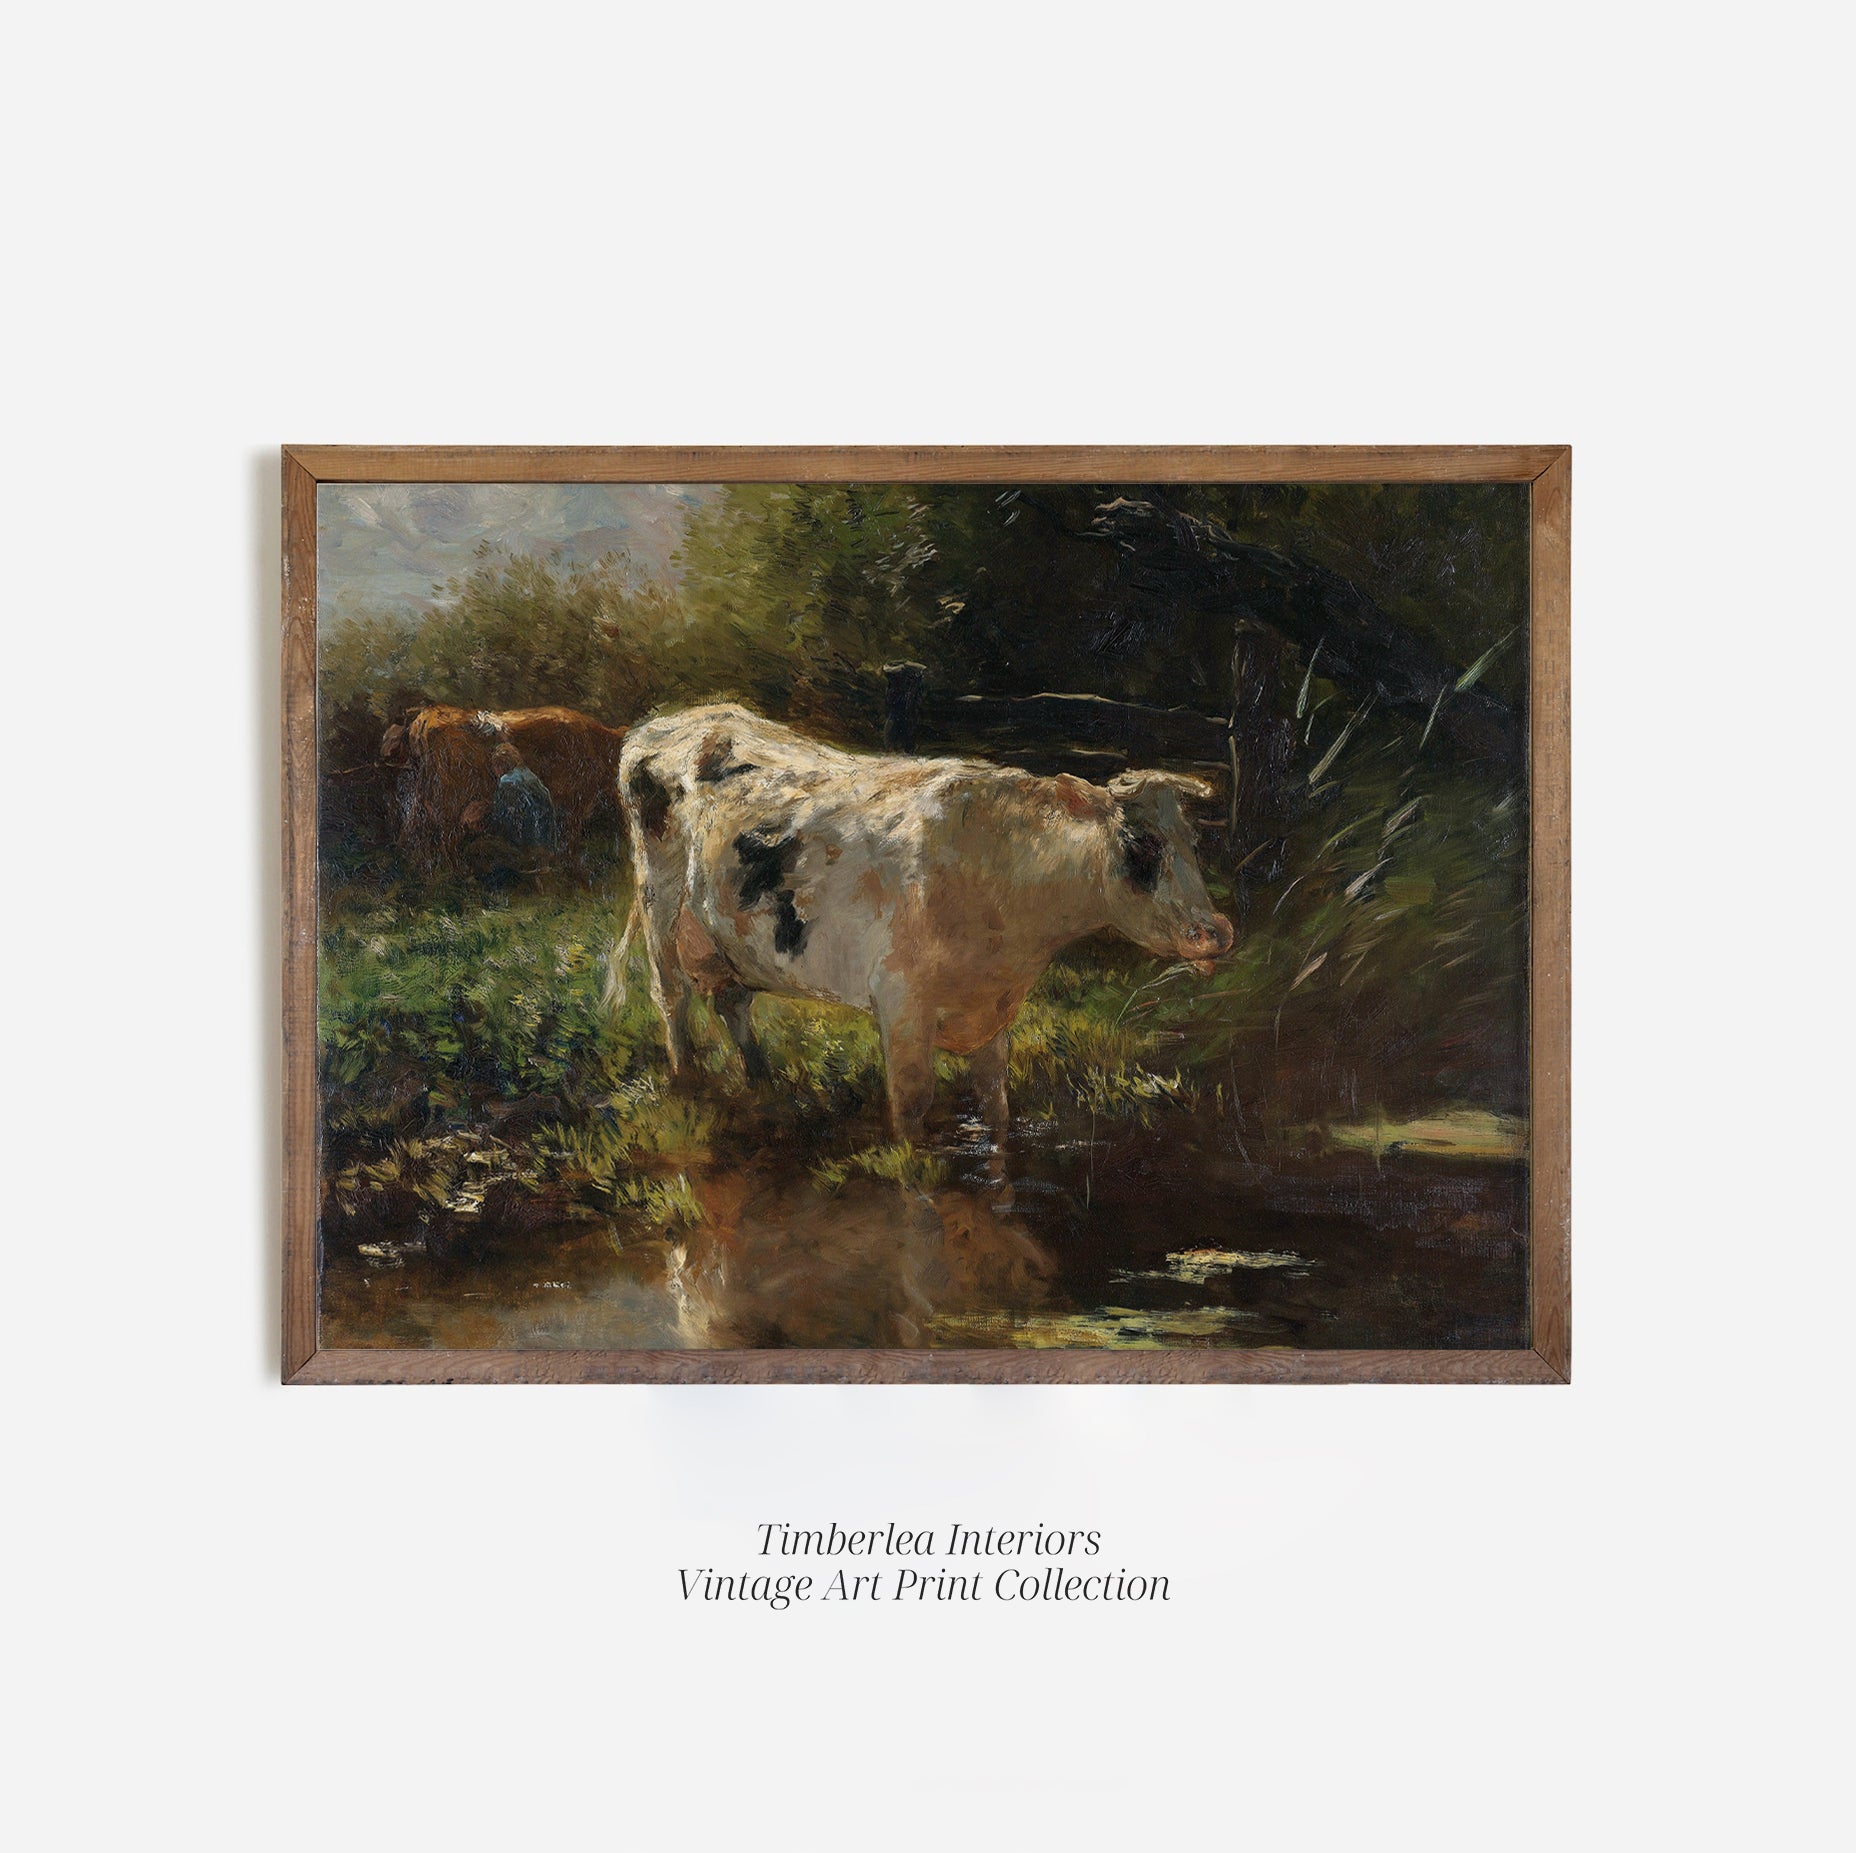 A vintage art print titled 'Spotted Cow,' featuring a black-and-white cow standing near a pond, framed in dark wood. The lush greenery and soft lighting add to the tranquil, pastoral feel of the artwork. The frame enhances the rustic charm of the piece.